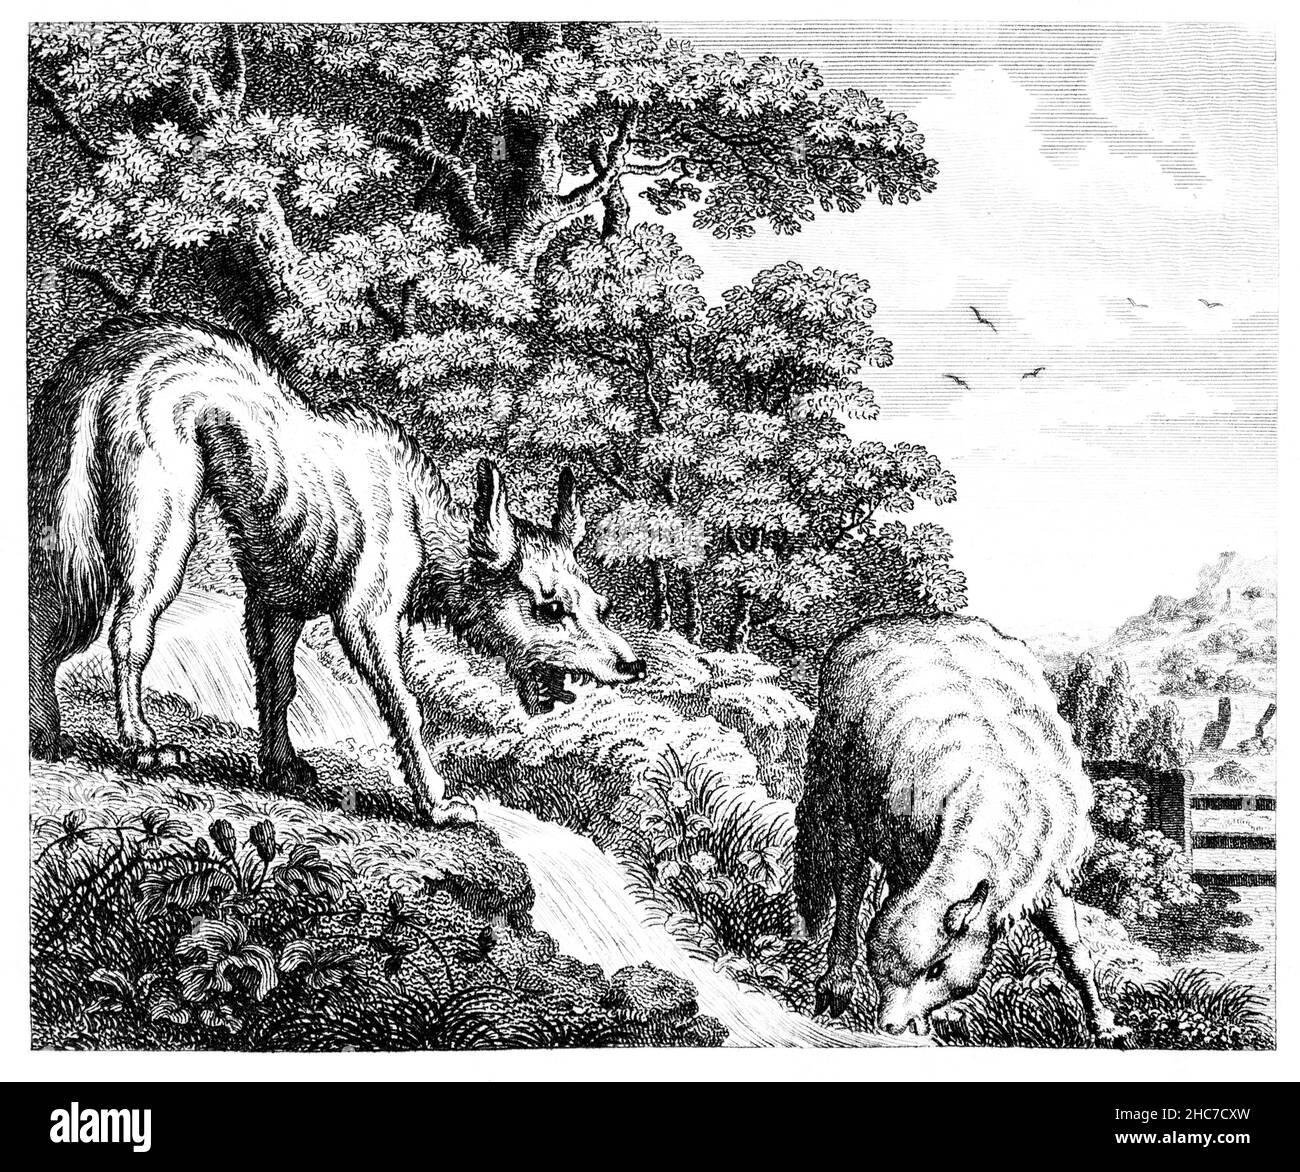 engraved illustration of The Wolf And The Lamb, tale of injustice, from 1793 First Edition of Stockdale’s Aesop’s Fables Stock Photo